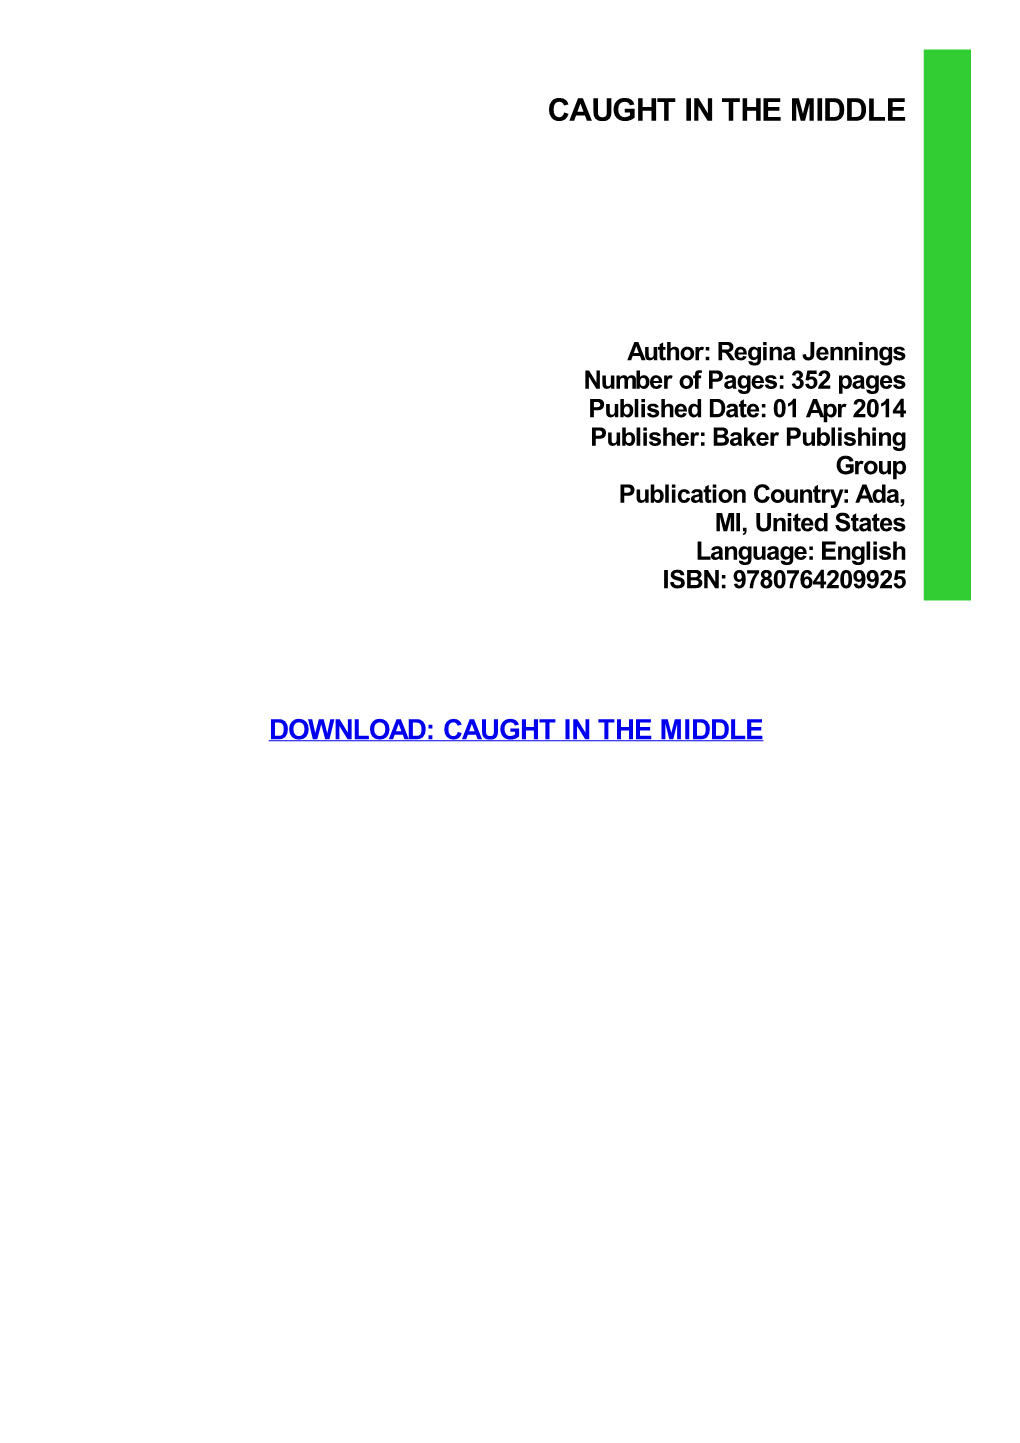 DOWNLOAD: CAUGHT in the MIDDLE Caught in the Middle PDF Book Gehrigandfridtjofj